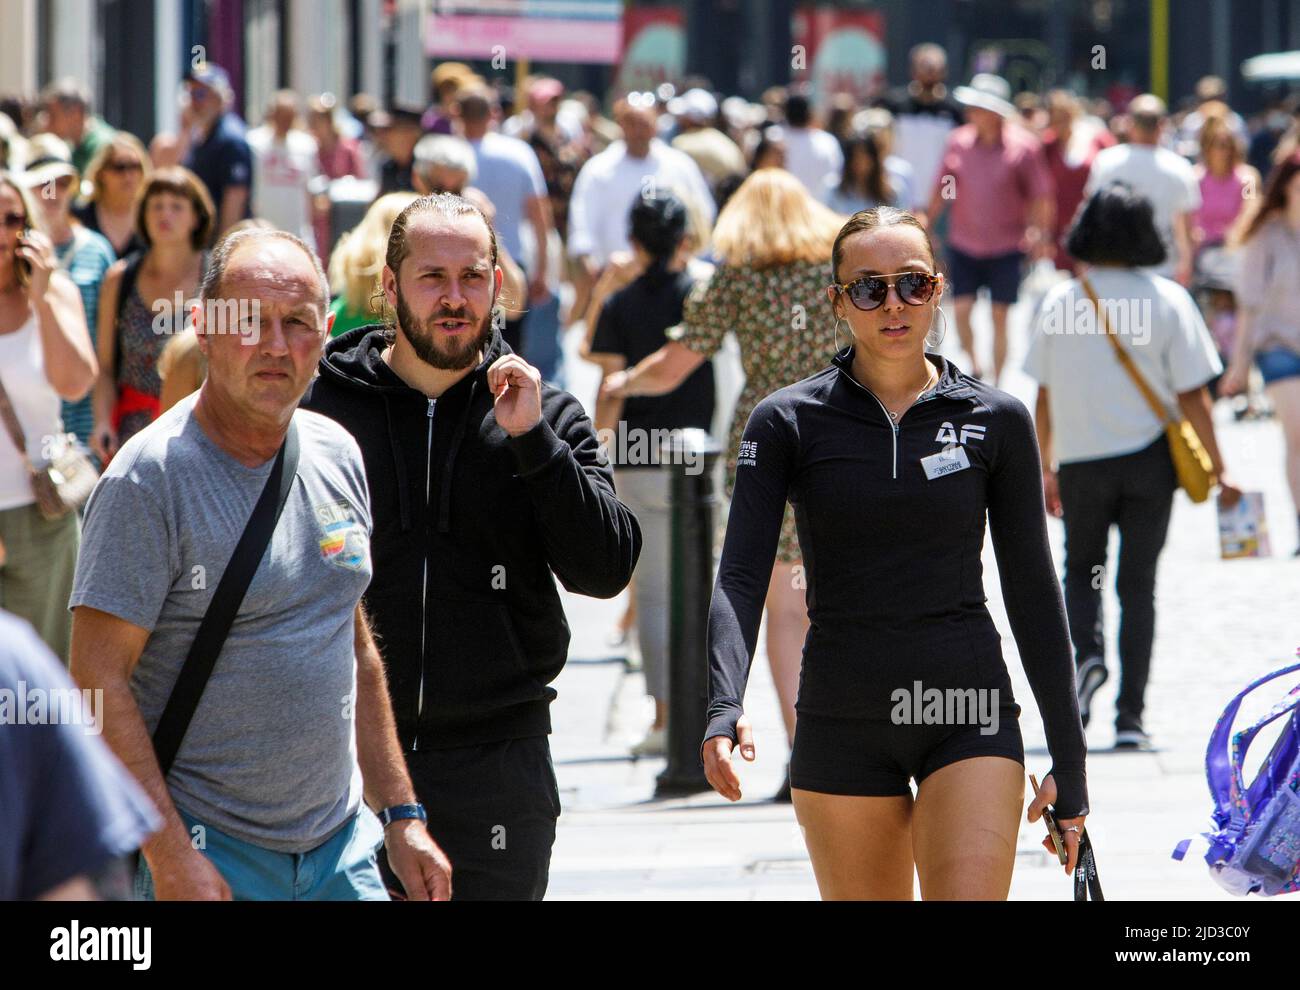 Bath, UK, 17th June, 2022. With many parts of the UK enjoying another very hot and sunny day, shoppers enjoying the warm weather are pictured on the streets of Bath. Credit: Lynchpics/Alamy Live News Stock Photo